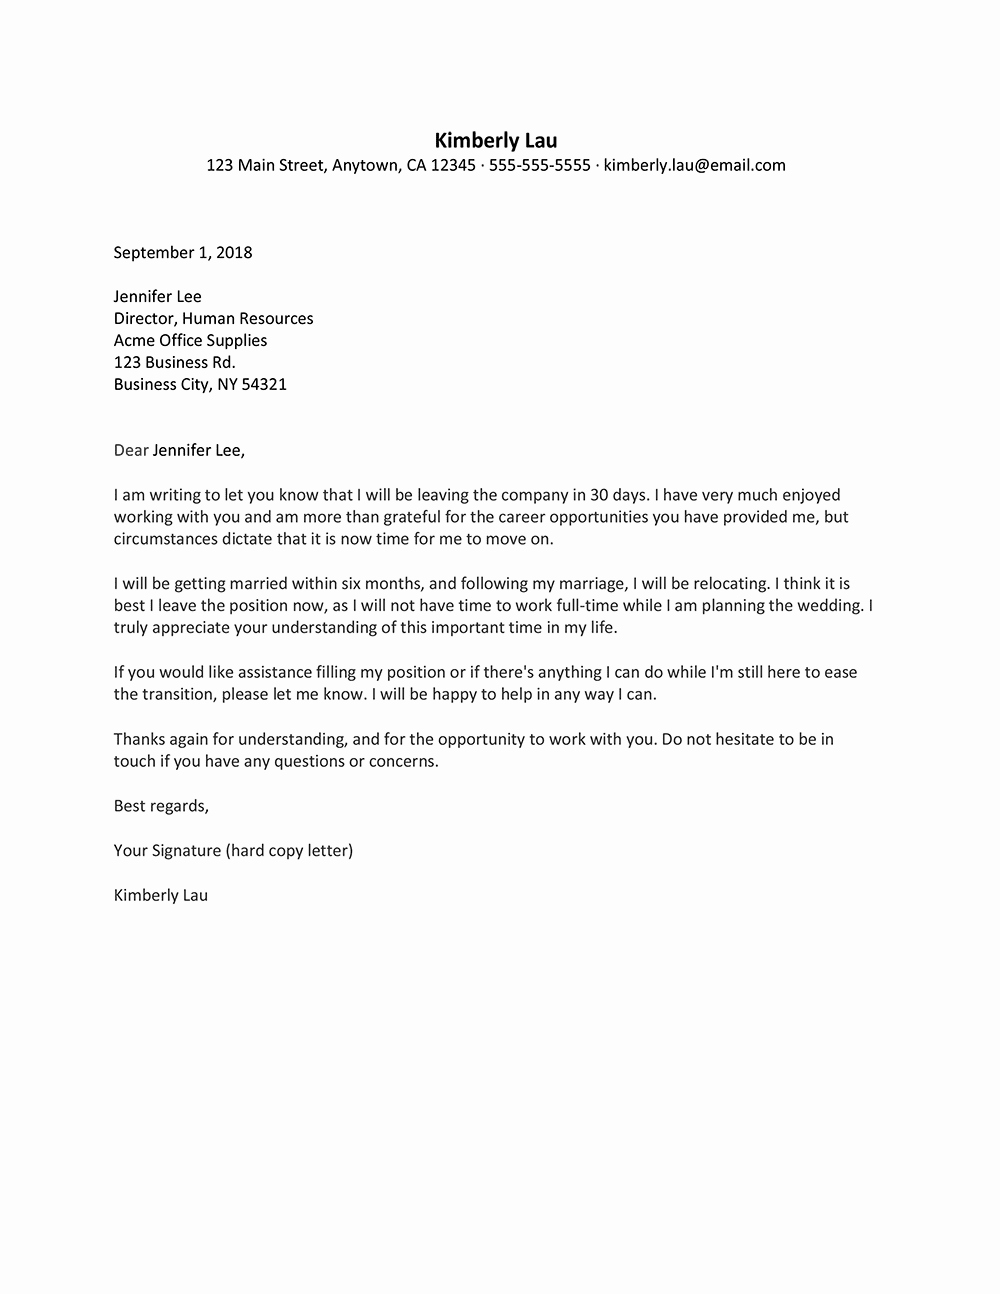 Child Relocation Agreement Template Fresh Mitment Letter Sample Tagalog